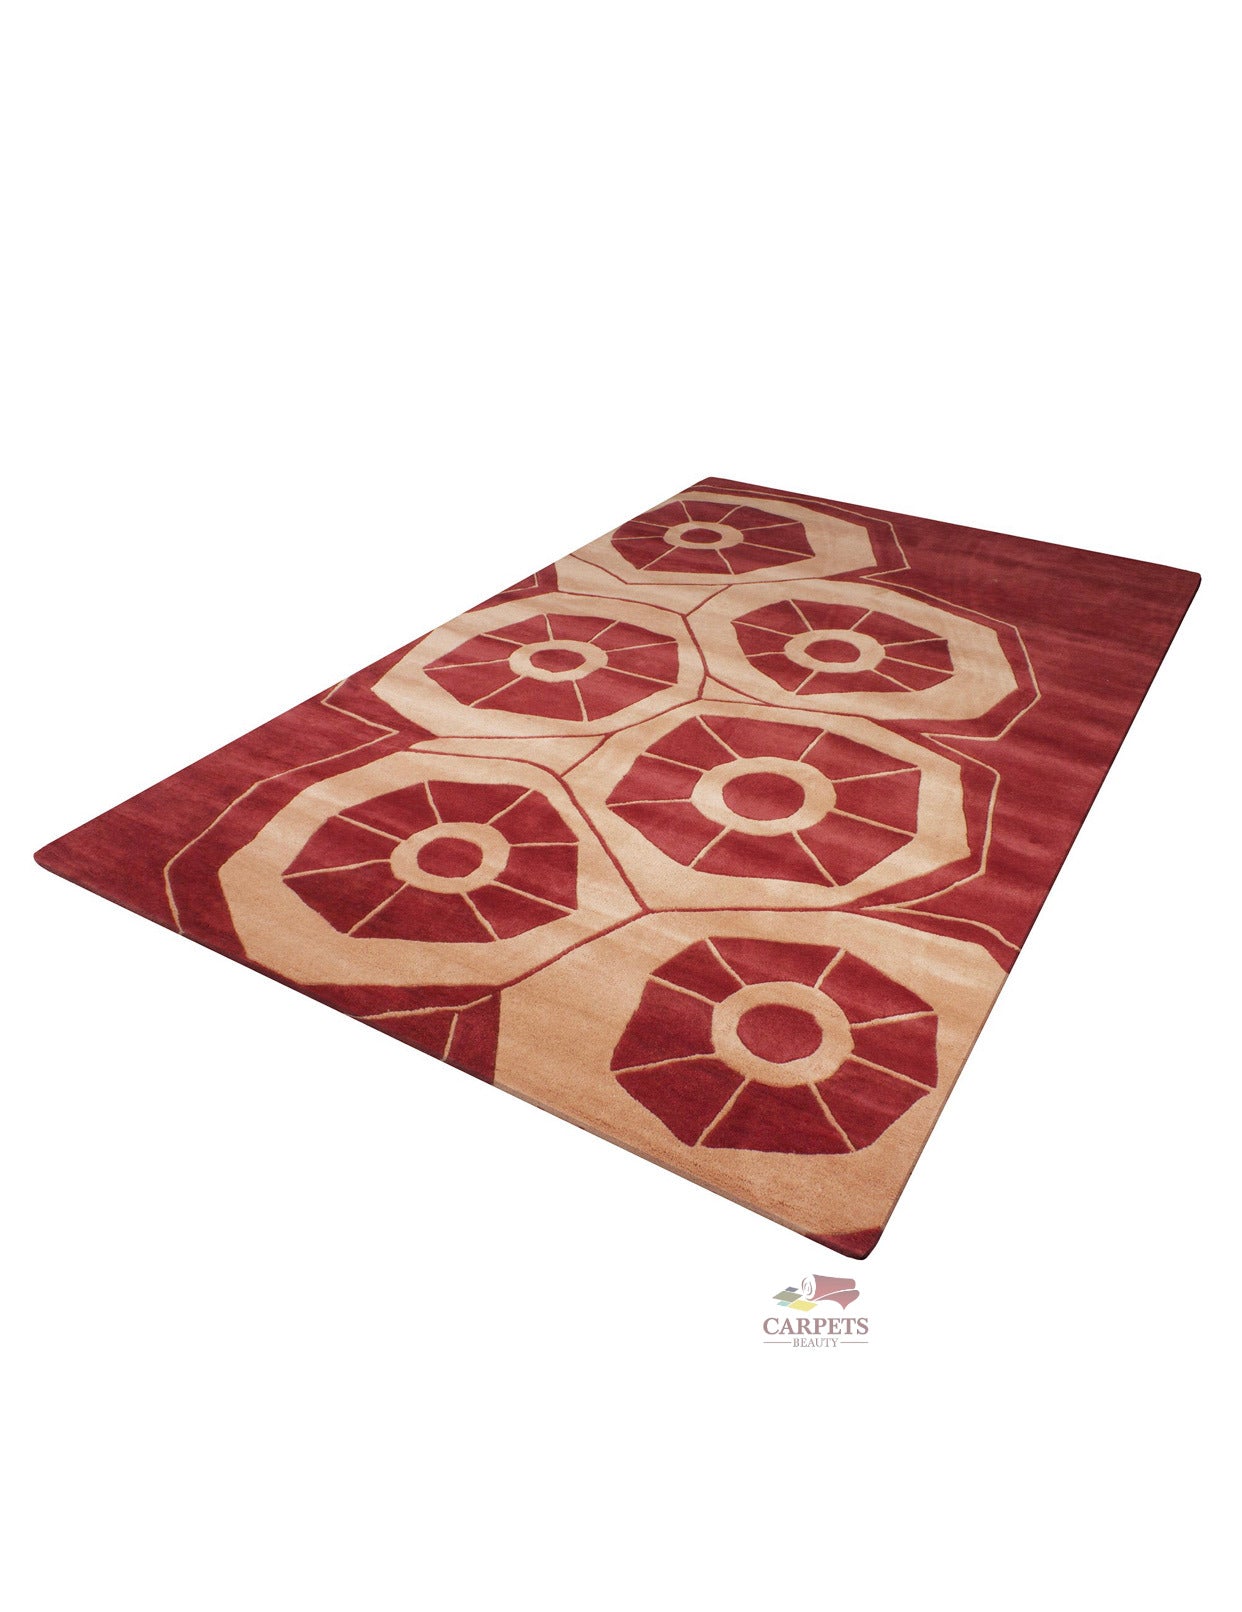 Beautiful Red Geometric Woolen Rug for bedrooms and living rooms